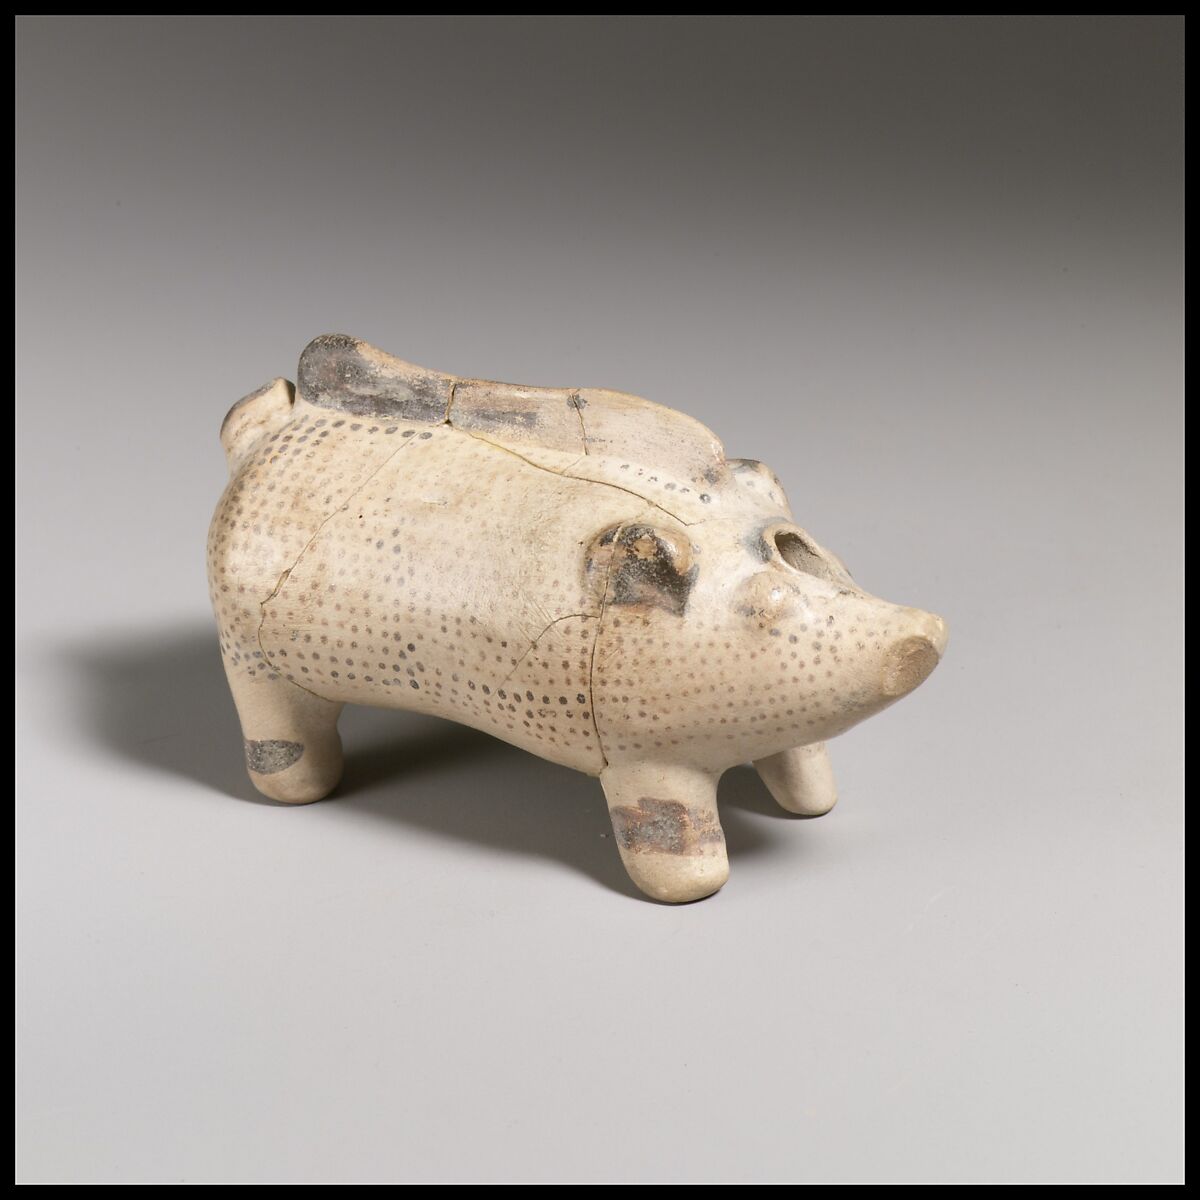 Terracotta vase in the form of a pig, Terracotta, Greek, probably Corinthian 